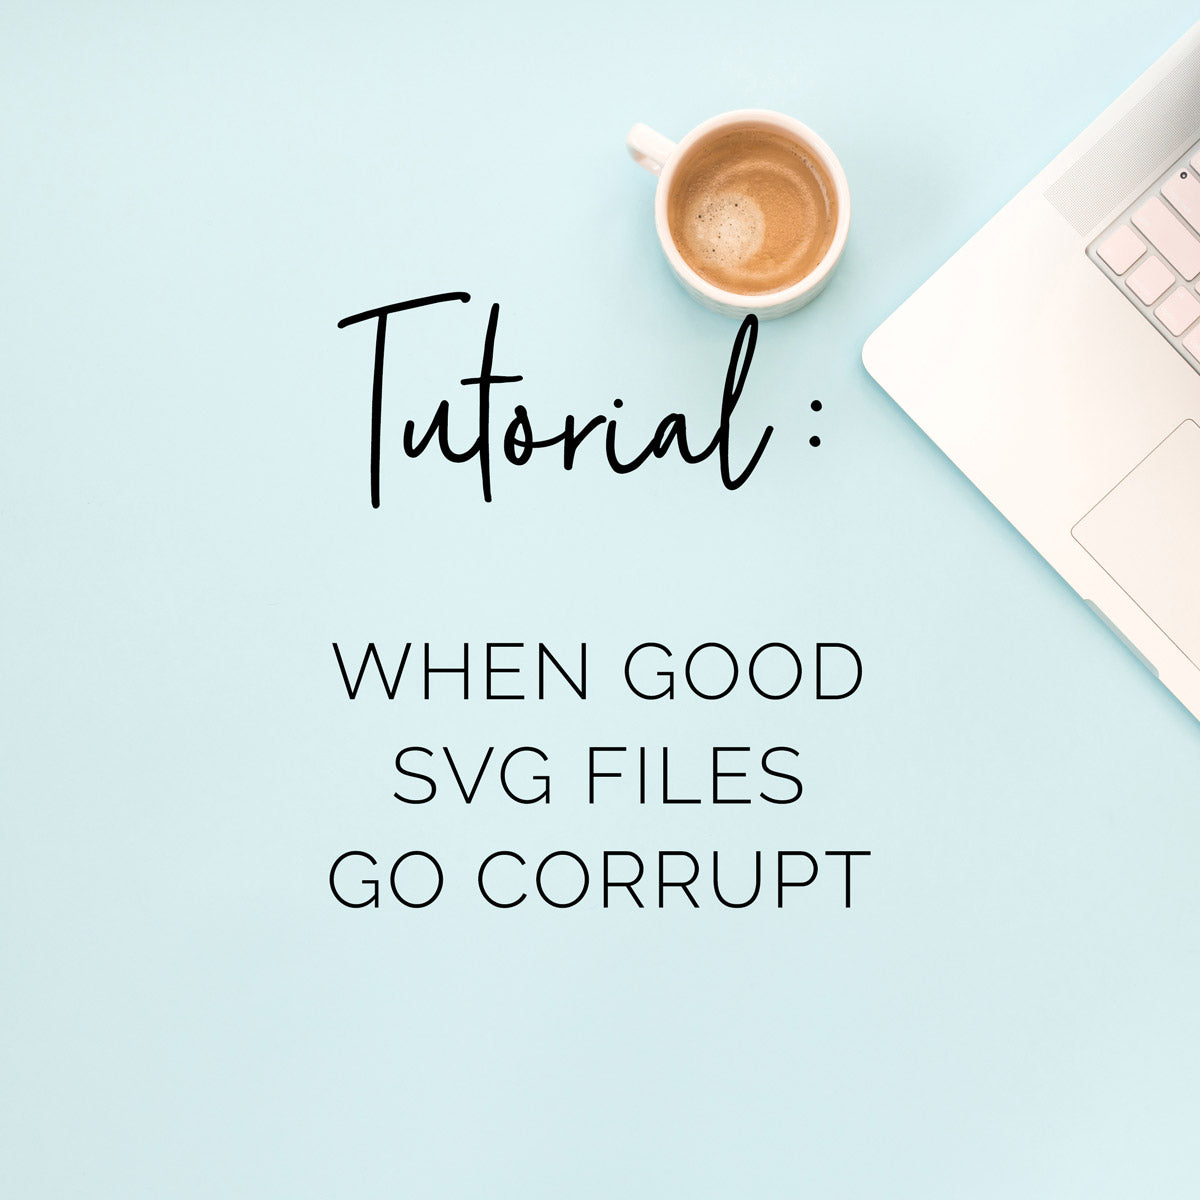 Tutorial: How to Fix Corrupt SVG Files for Silhouette and Cricut Software